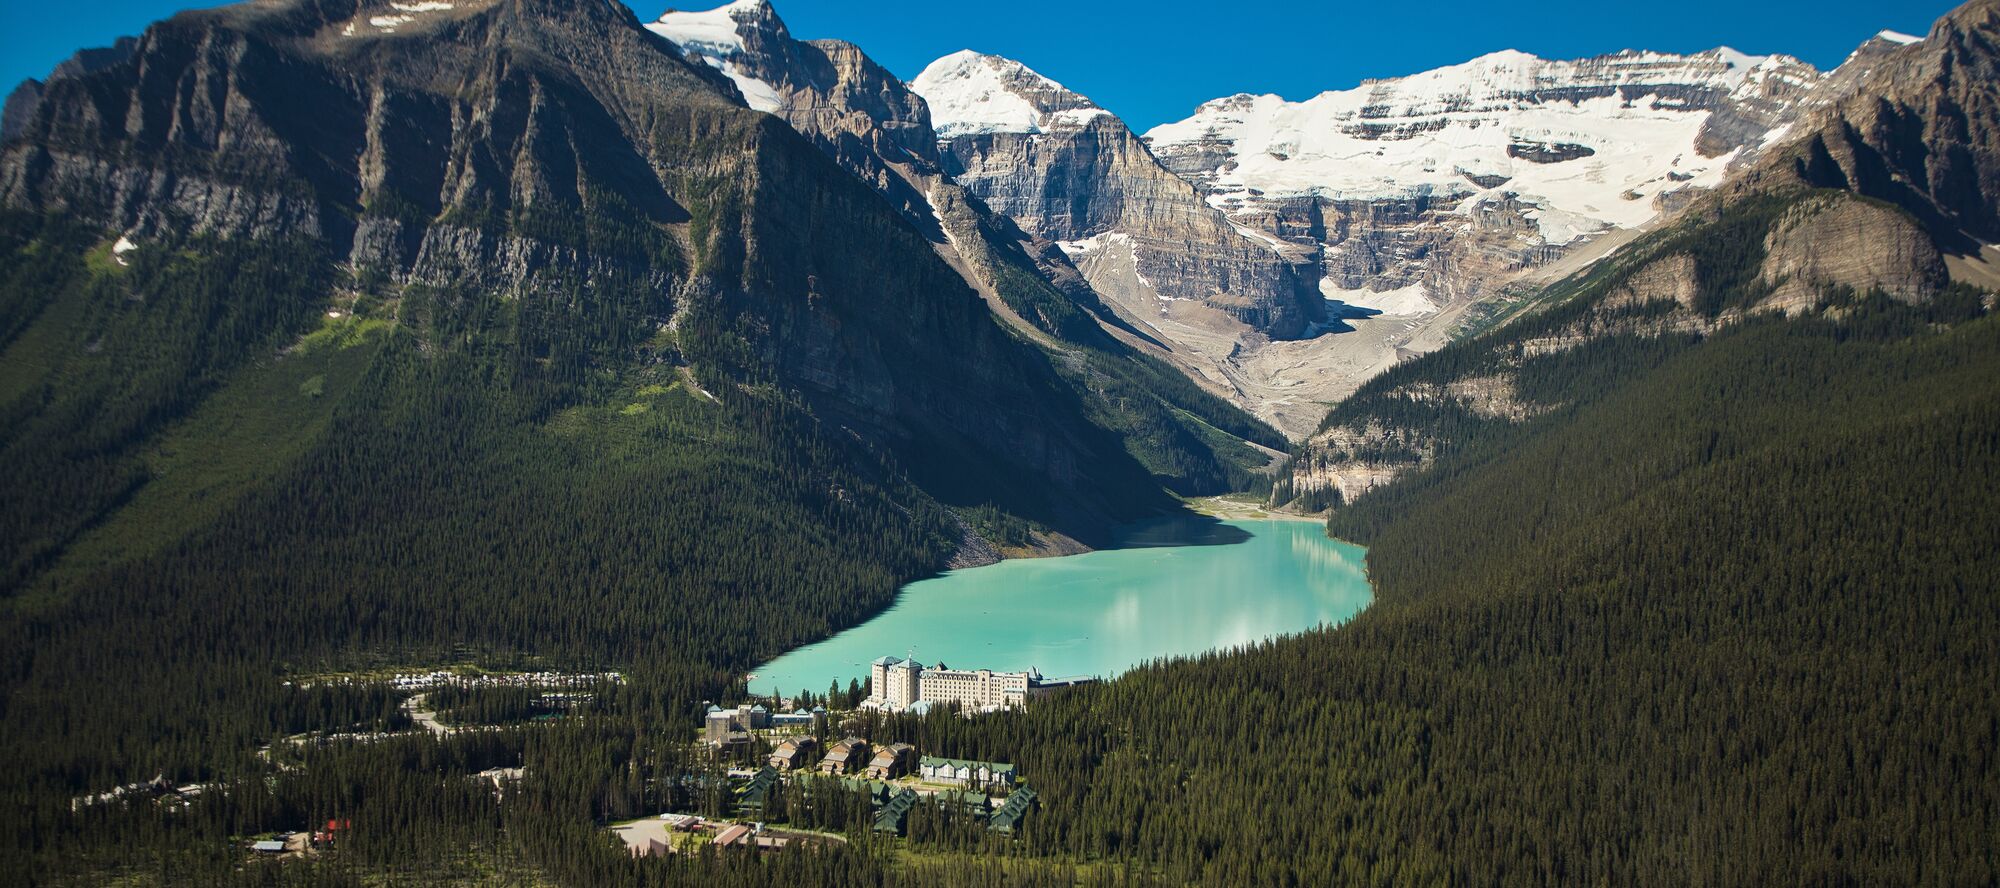 An aerial view of Fairmont Chateau Lake Louise in the summer with the turquoise lake and mountains in the background